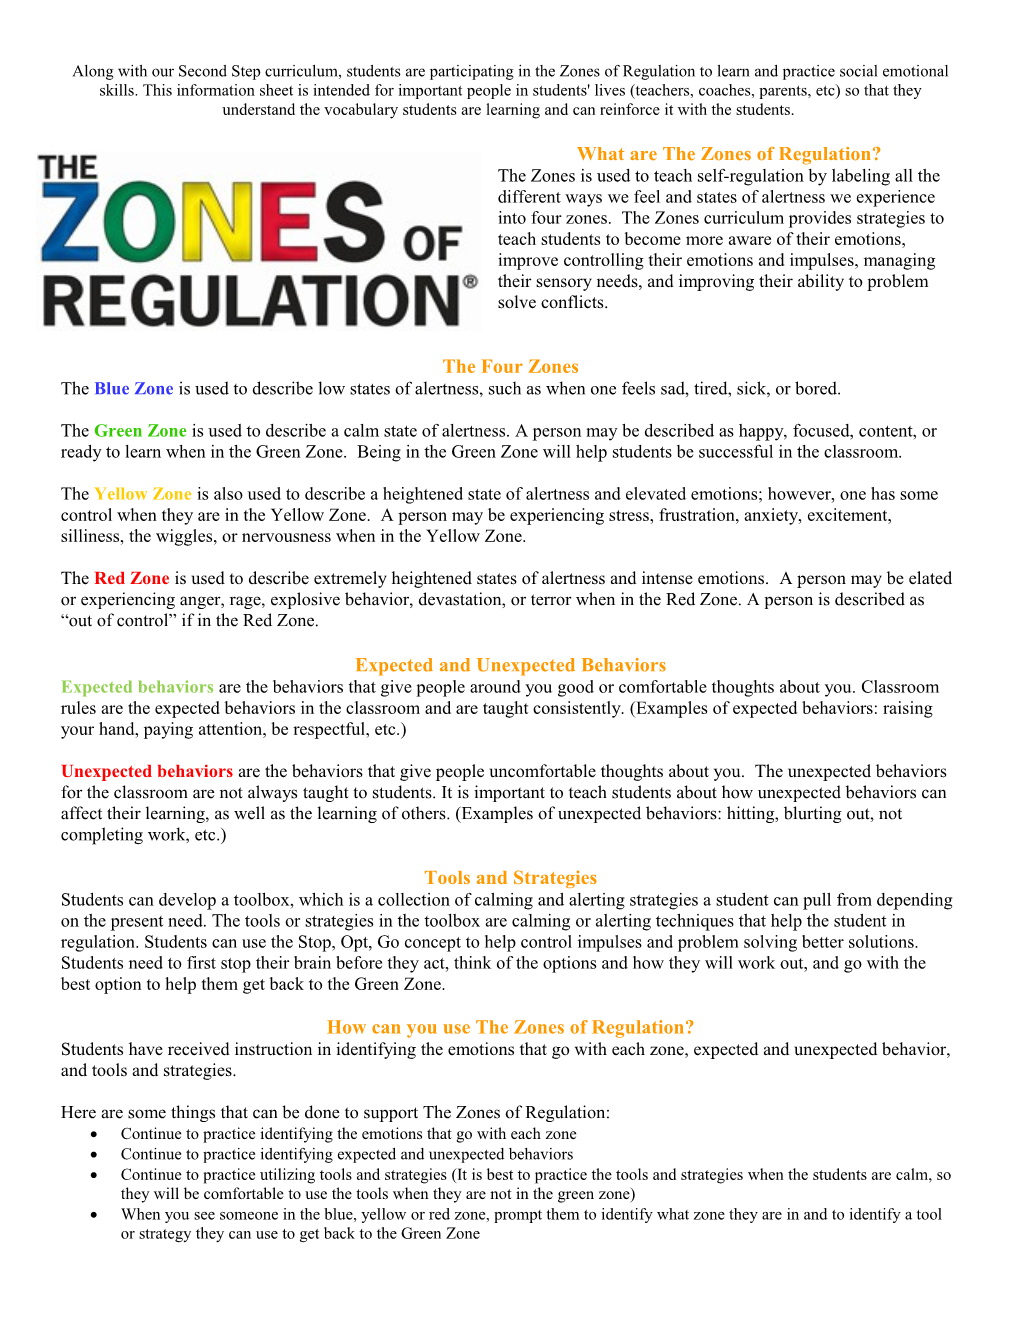 Along with Our Second Step Curriculum, Students Are Participating in the Zones of Regulation